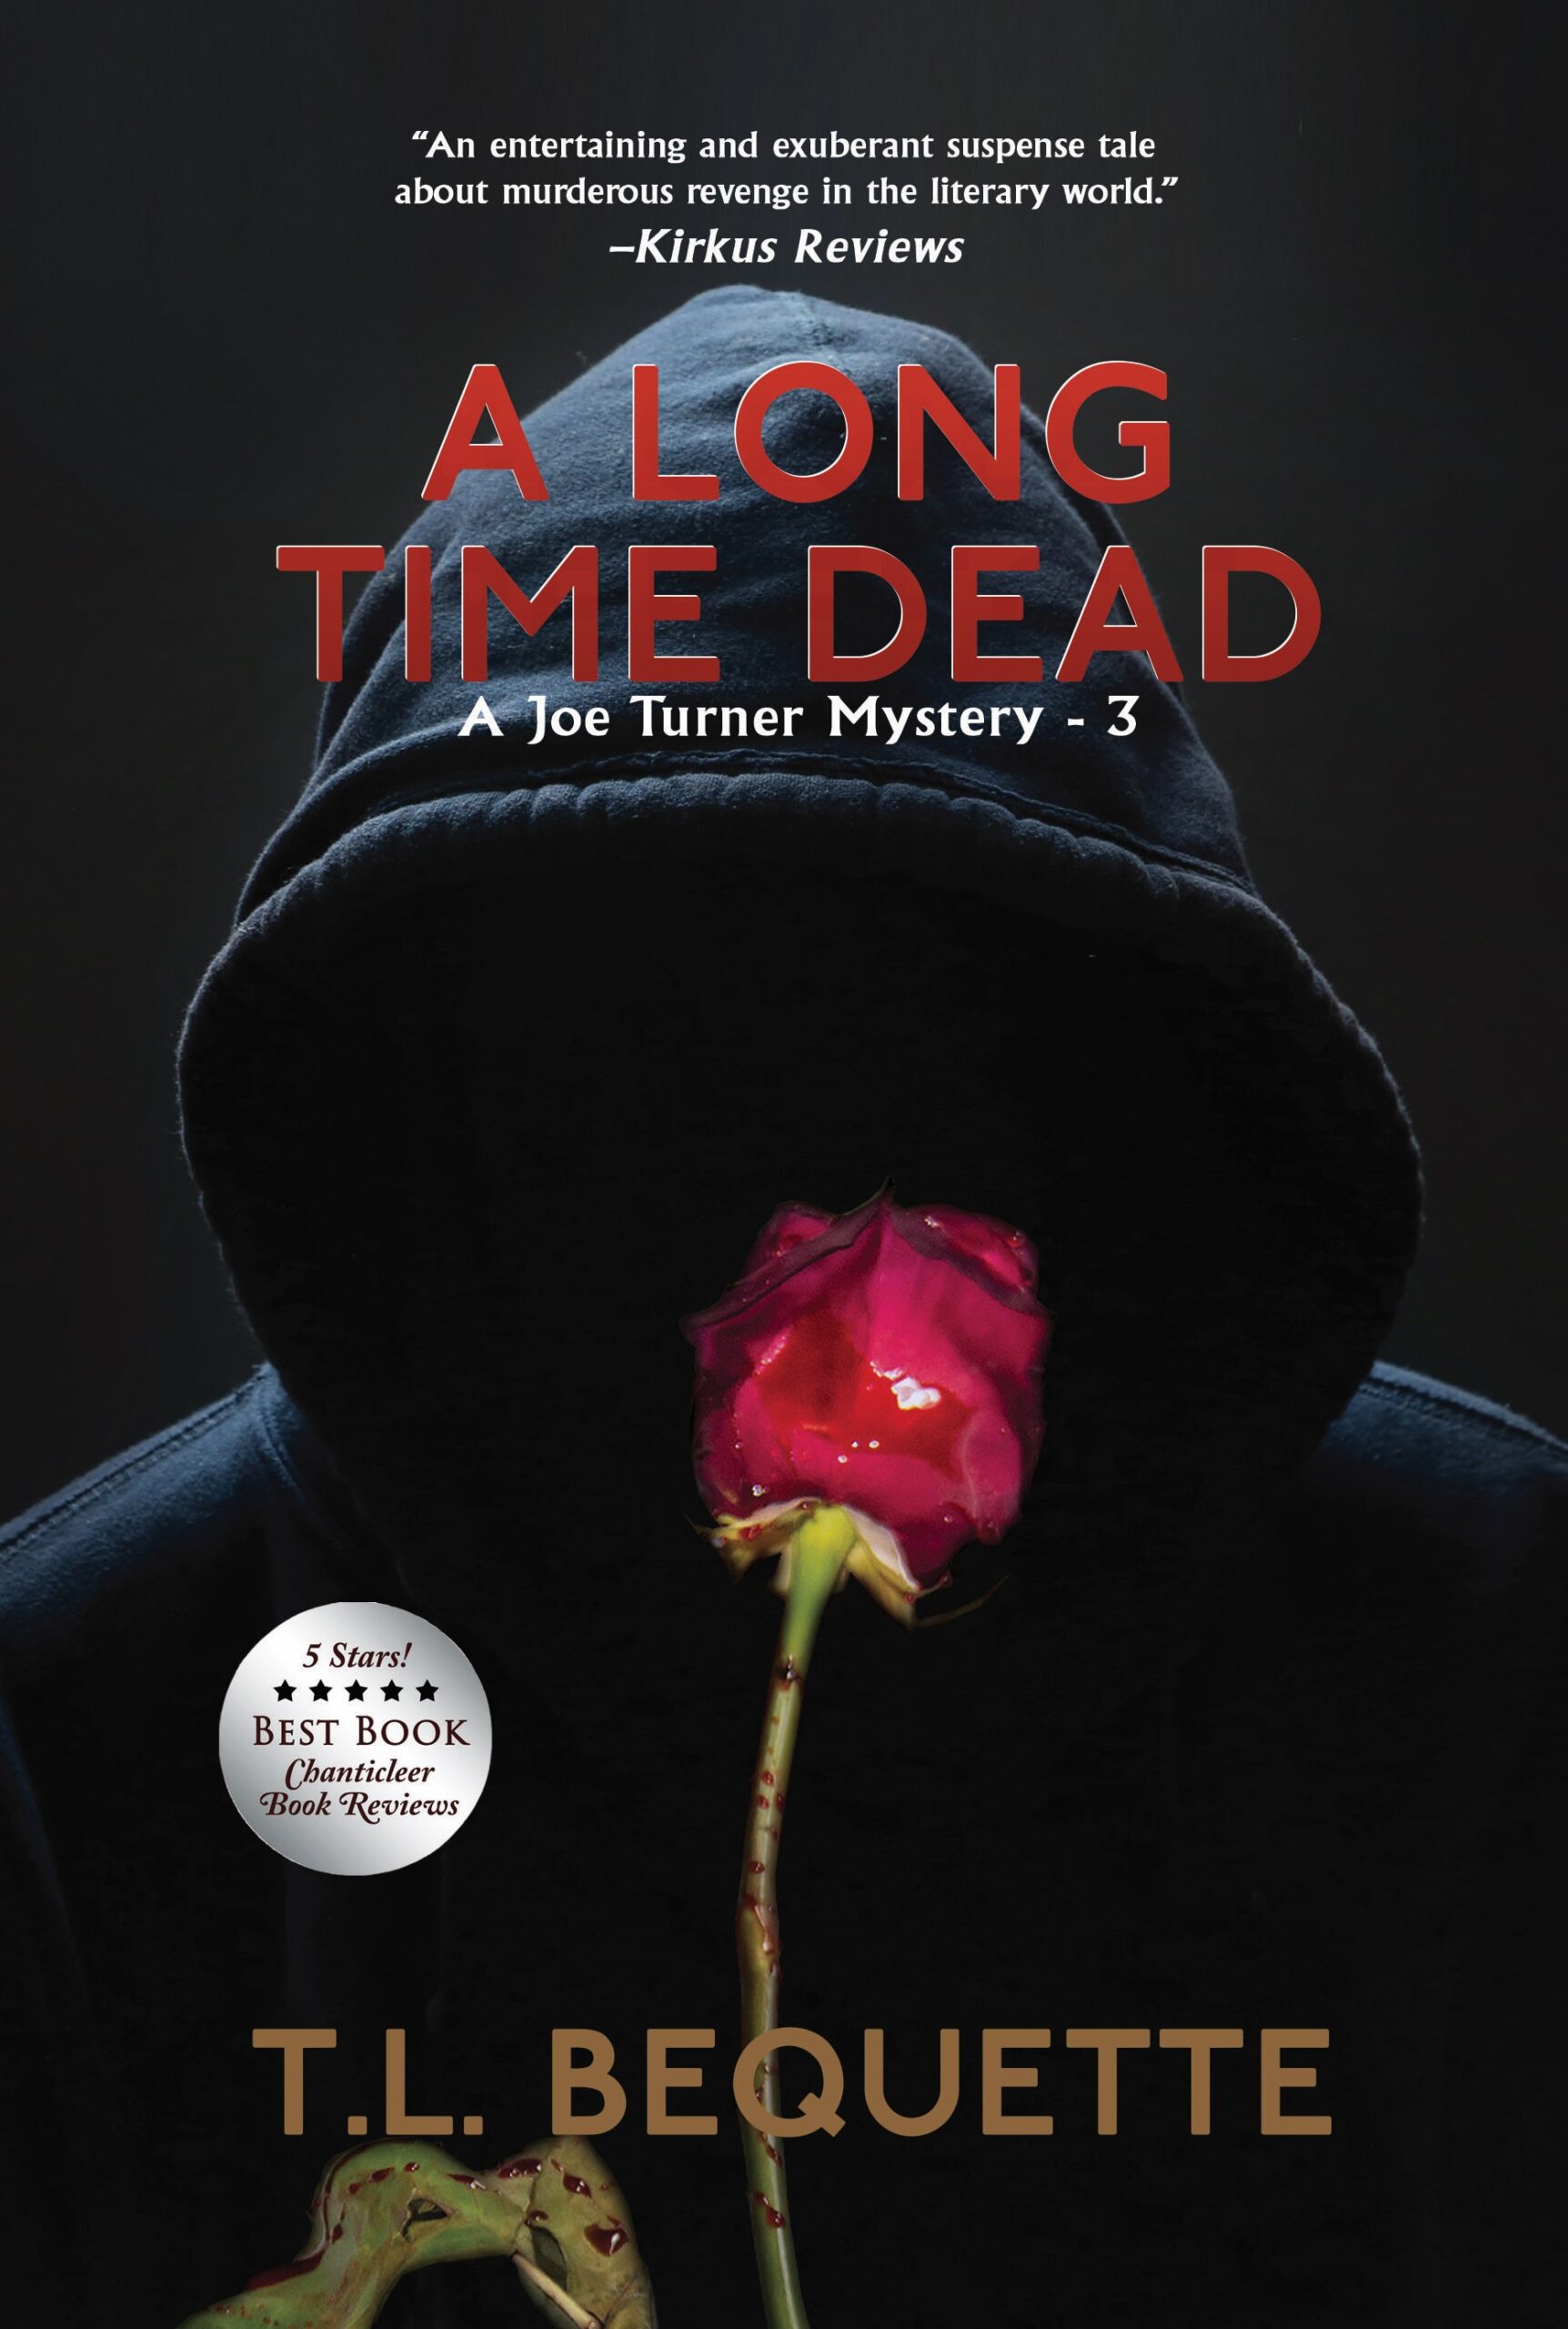 A Long Time Dead by T.L. Bequettte